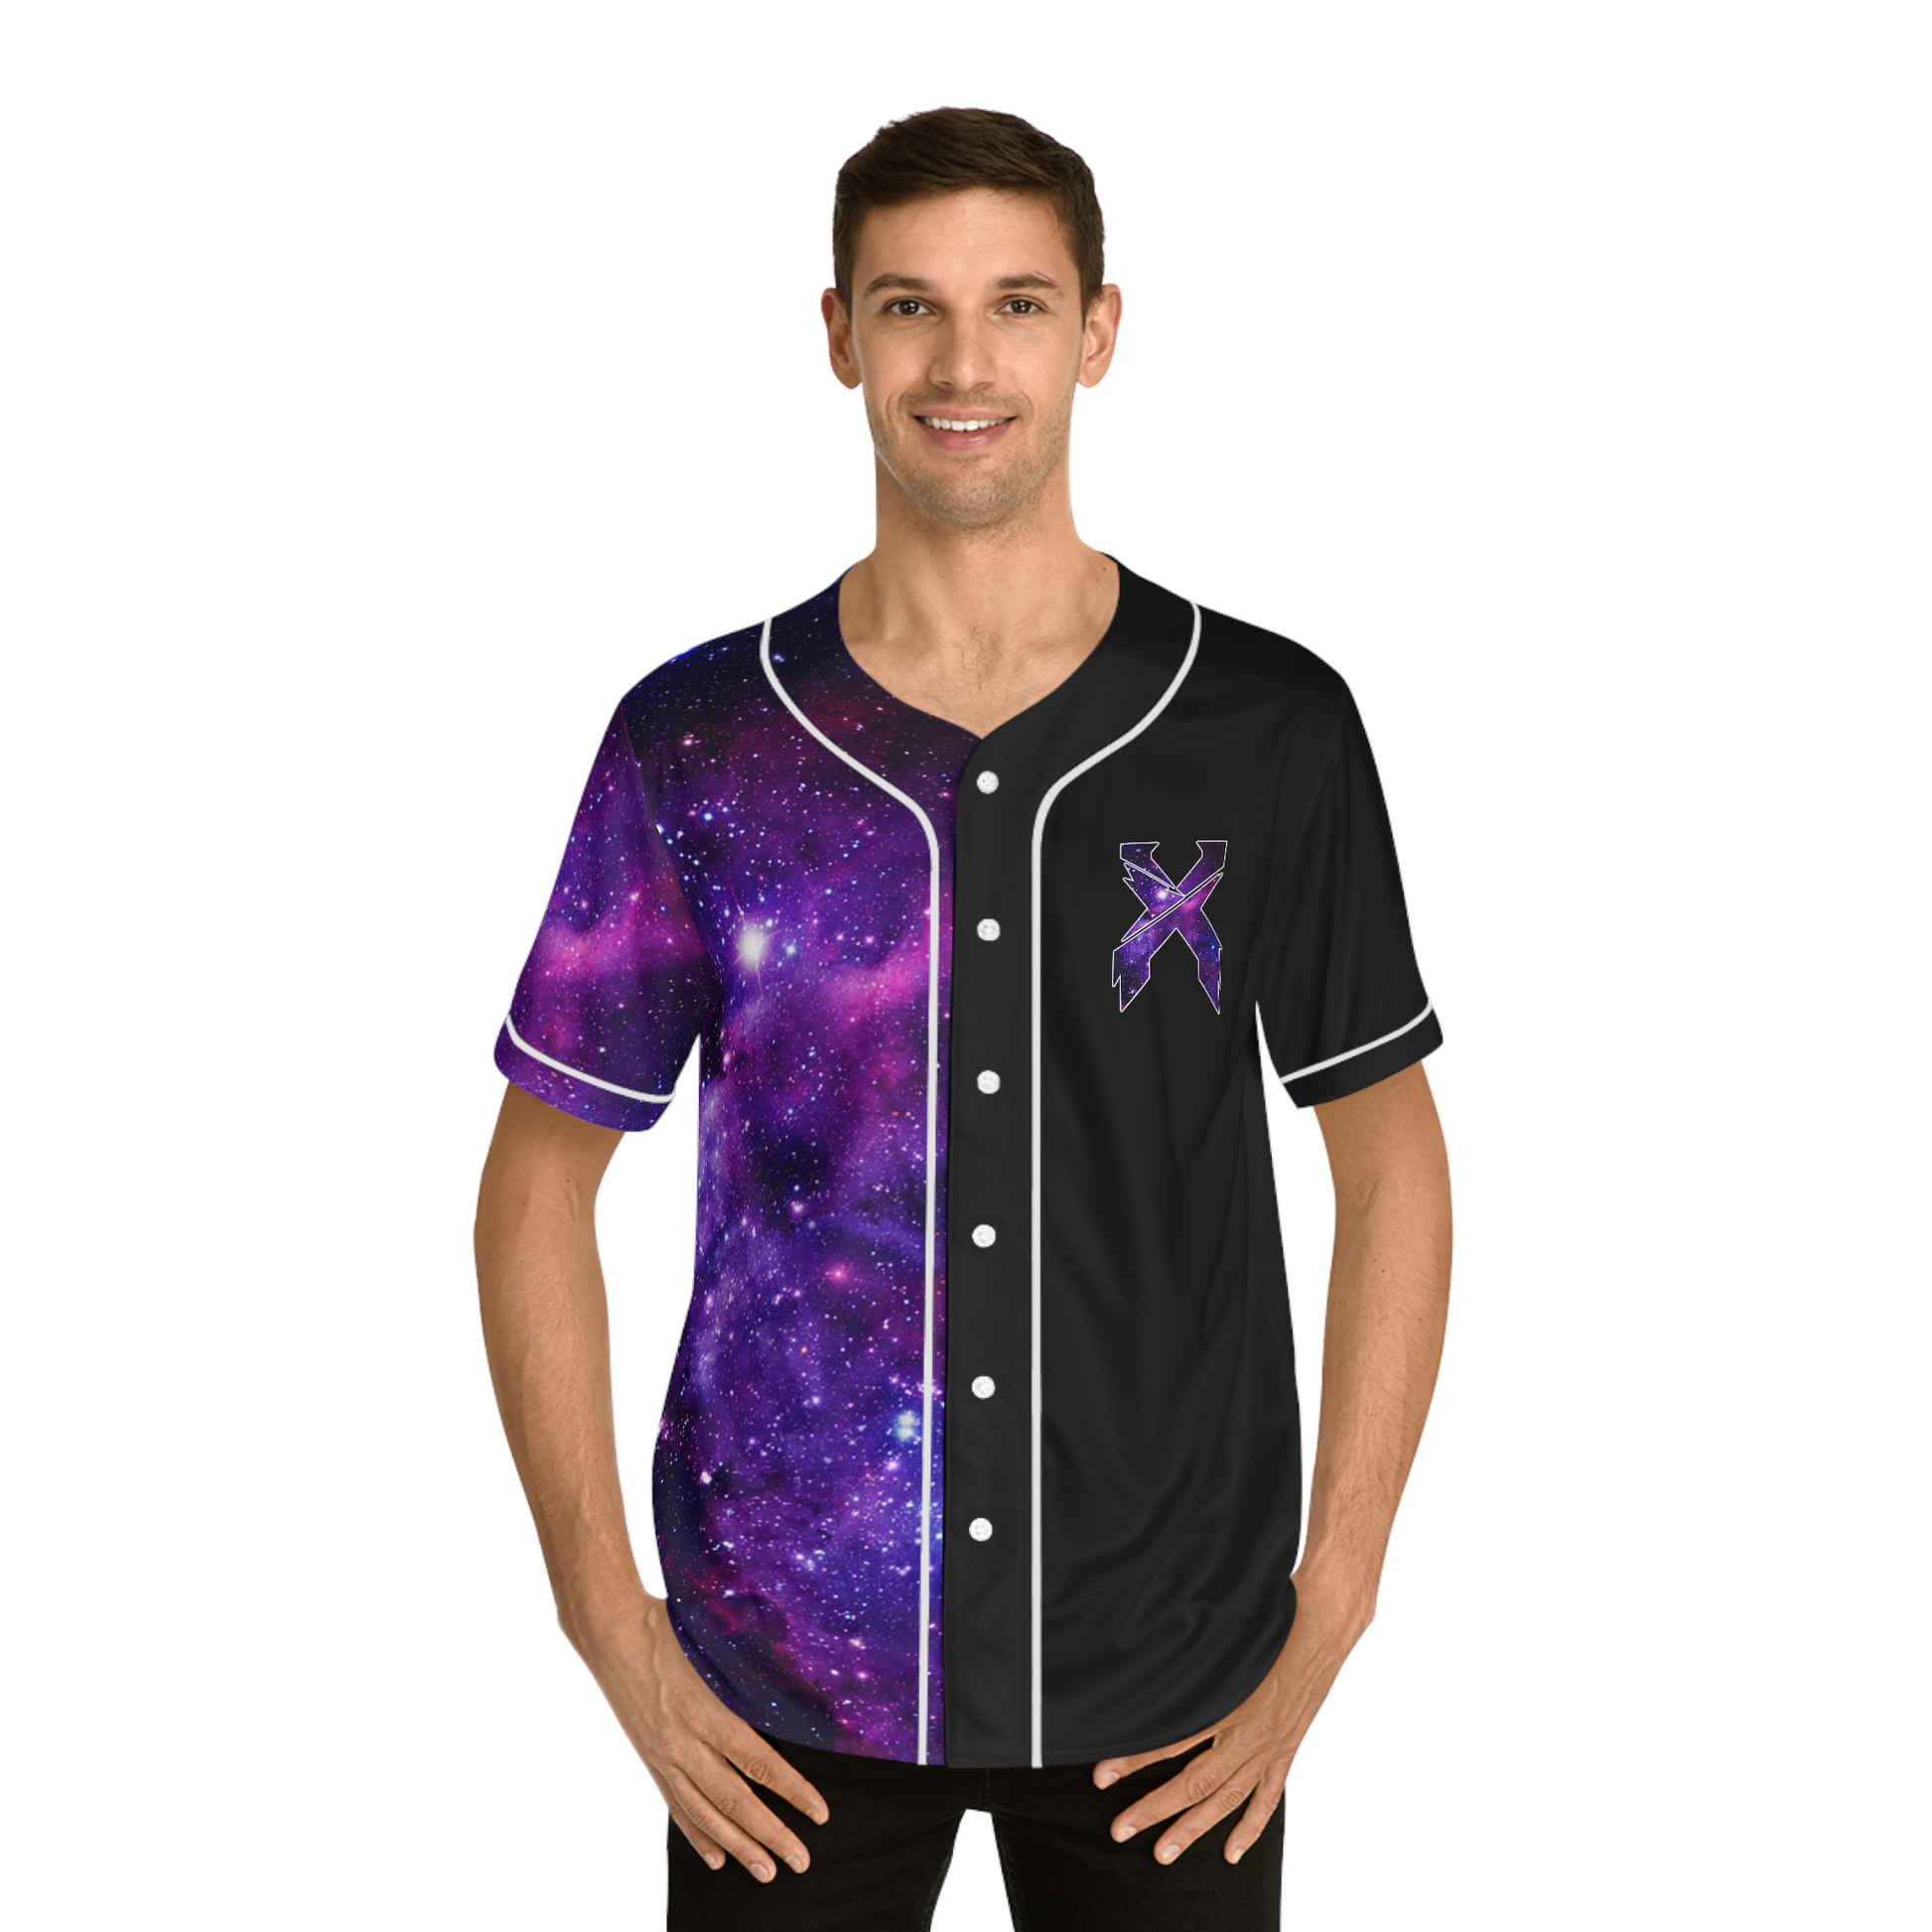 Excision red and blue galactic split rave jersey for Edm festivals